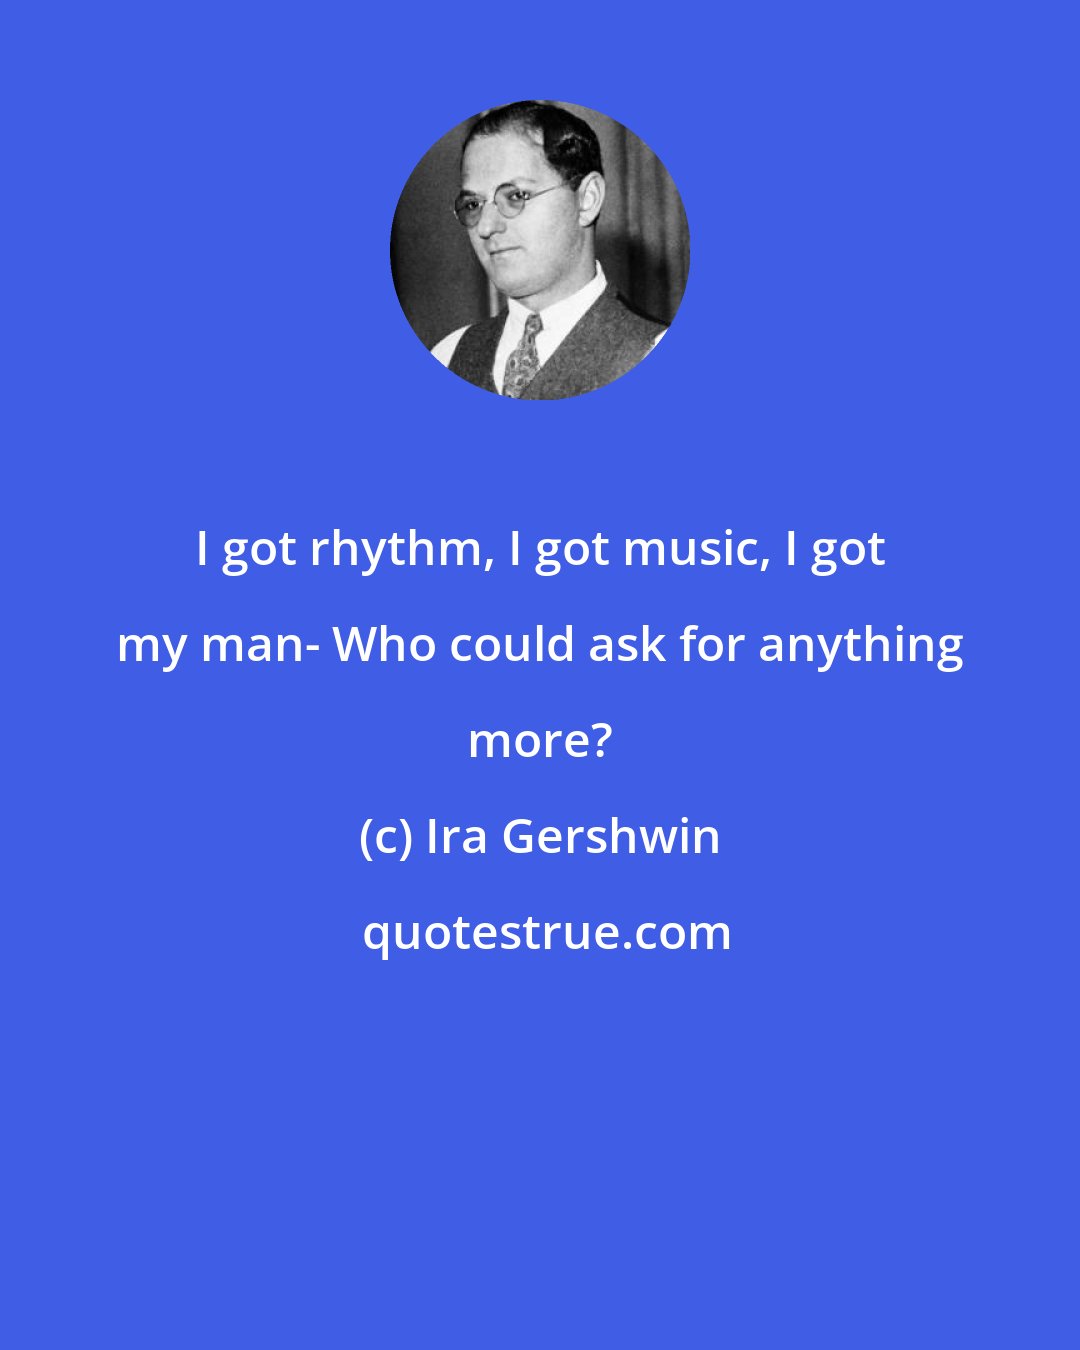 Ira Gershwin: I got rhythm, I got music, I got my man- Who could ask for anything more?